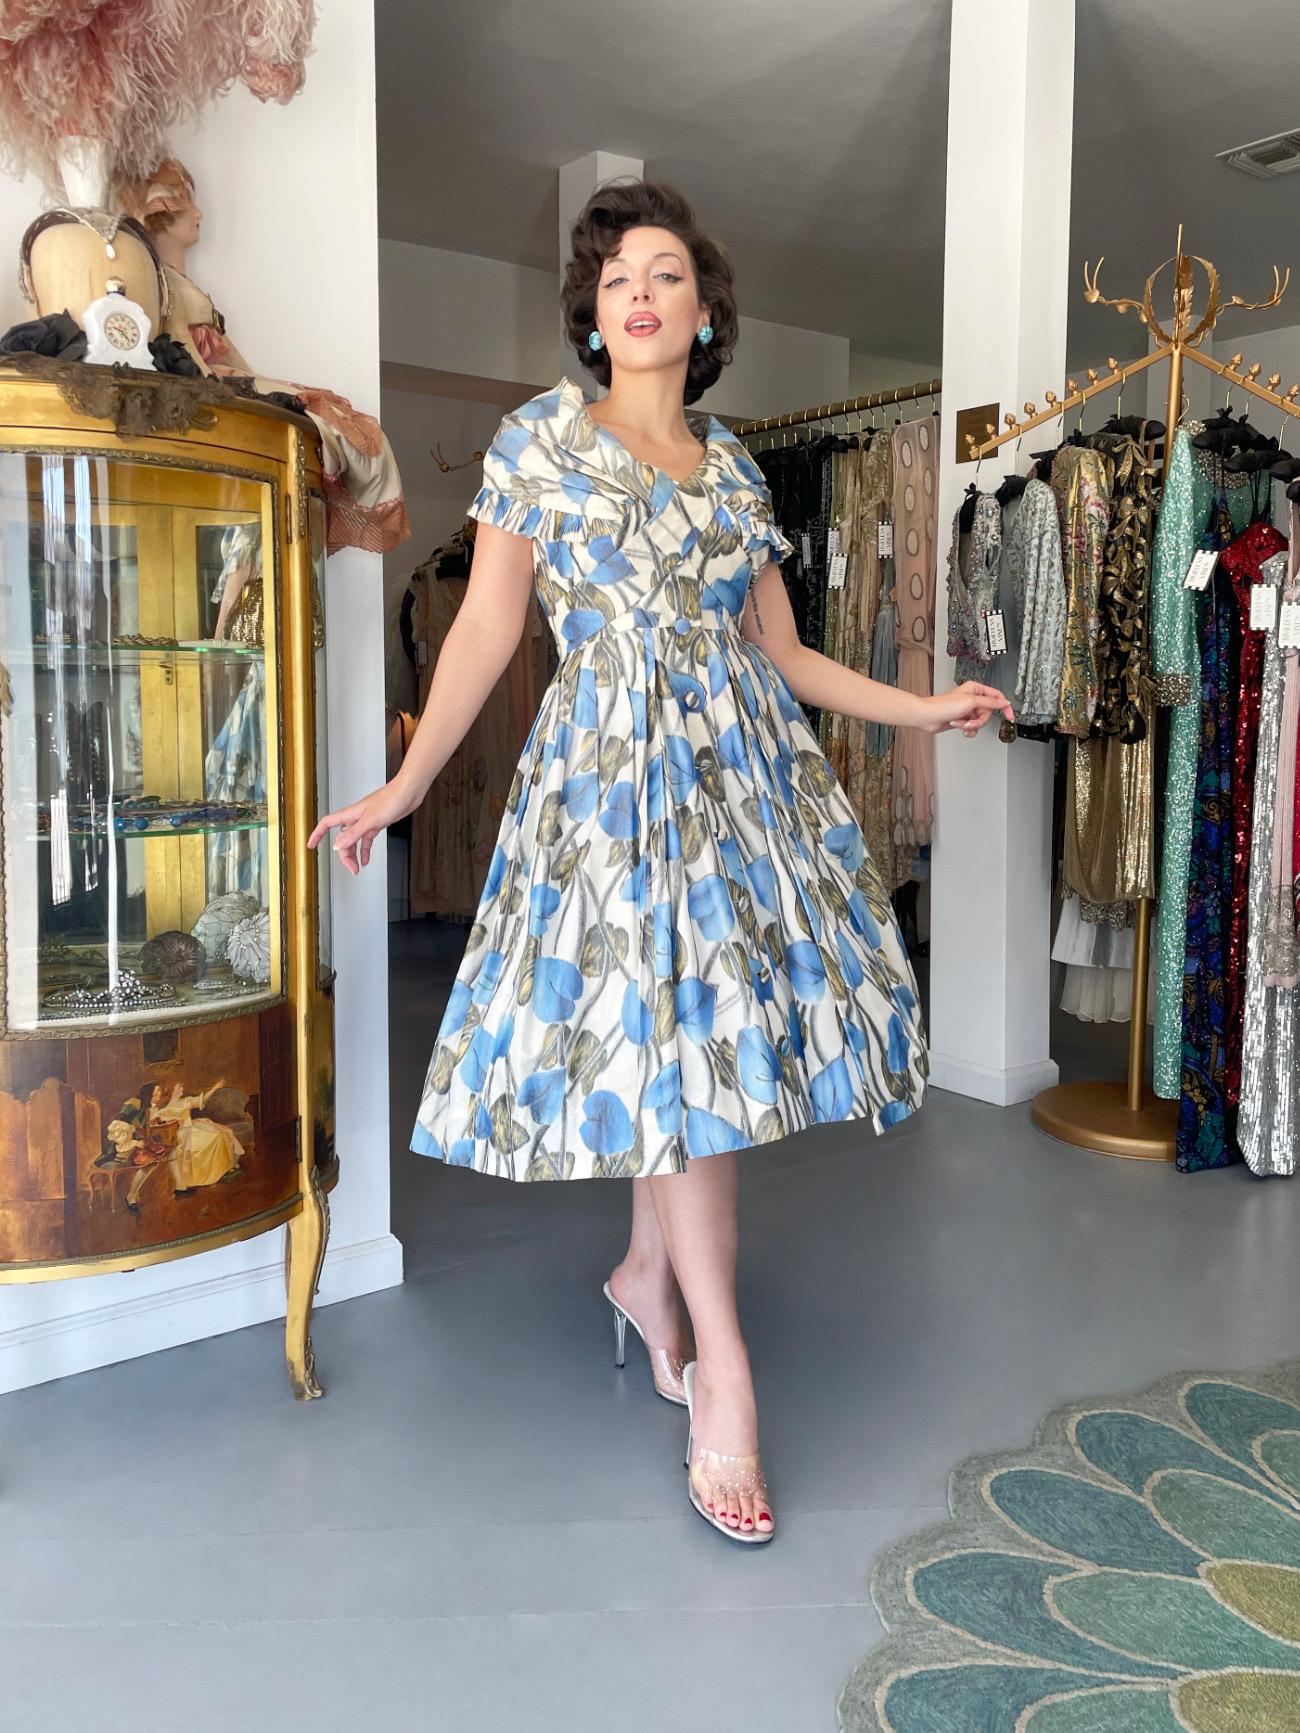 This is a ultra rare and highly coveted Christian Dior floral 'New Look' dress dating back to his lifetime 1956 spring/summer collection. The House of Dior has been an enduring icon of haute couture. While the House of Dior is still a thriving